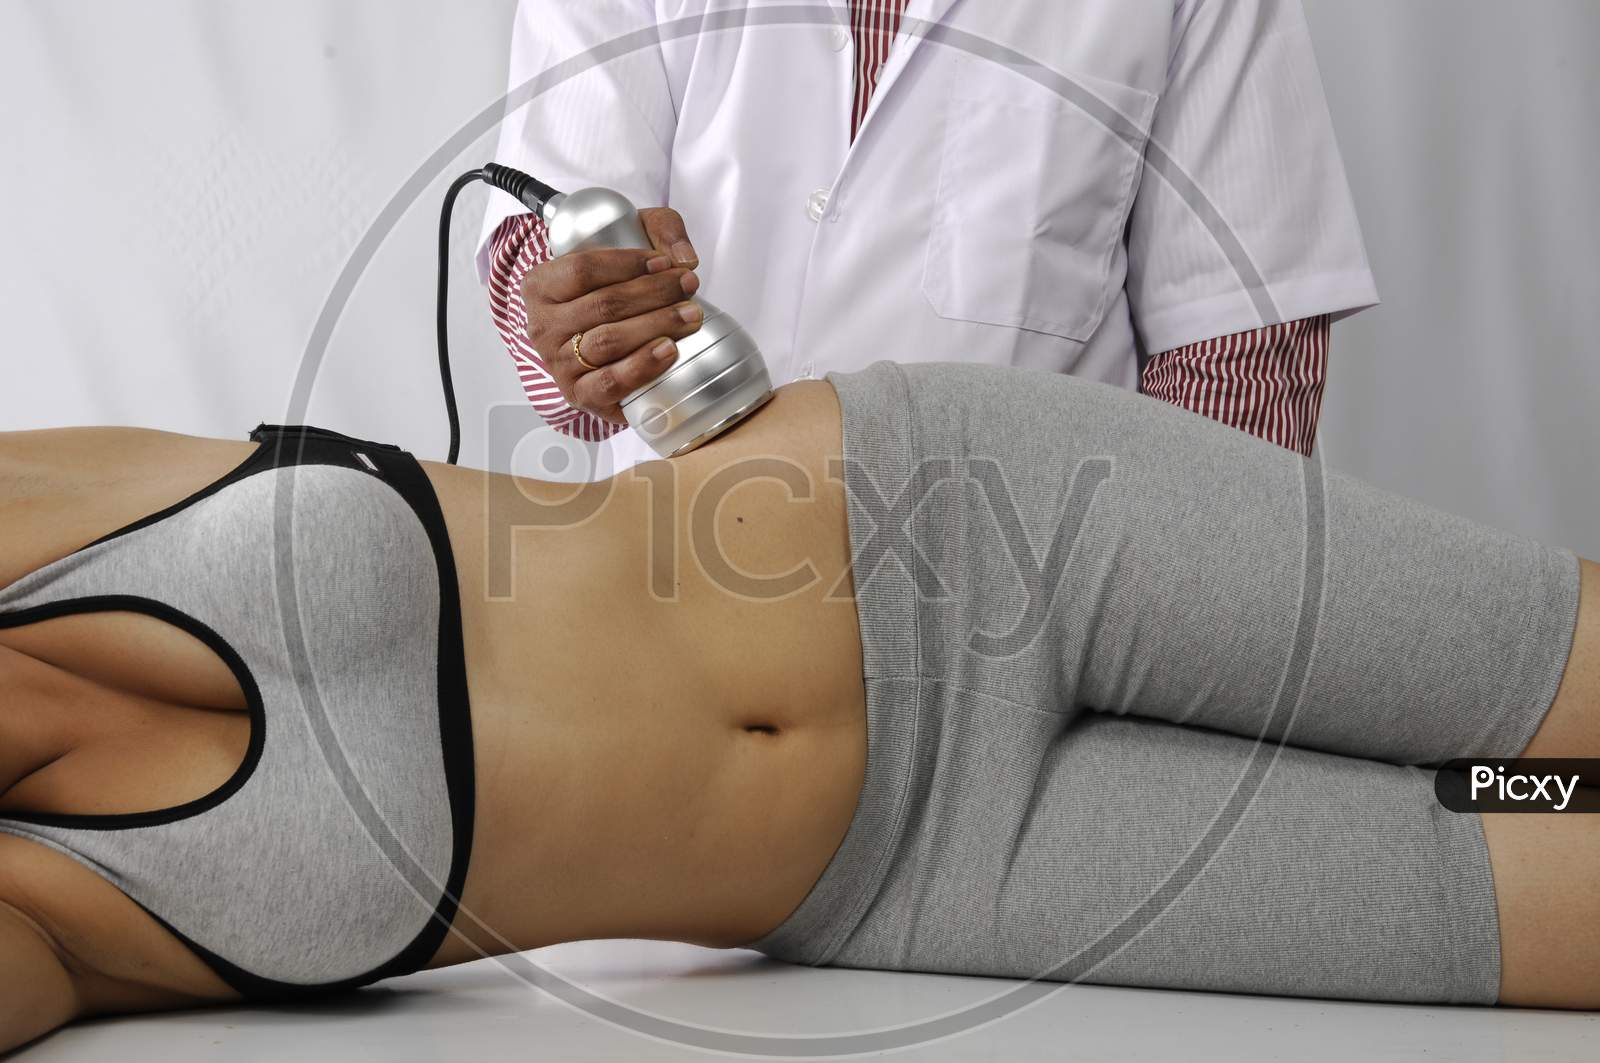 Therapist using fat burning machine on a young woman